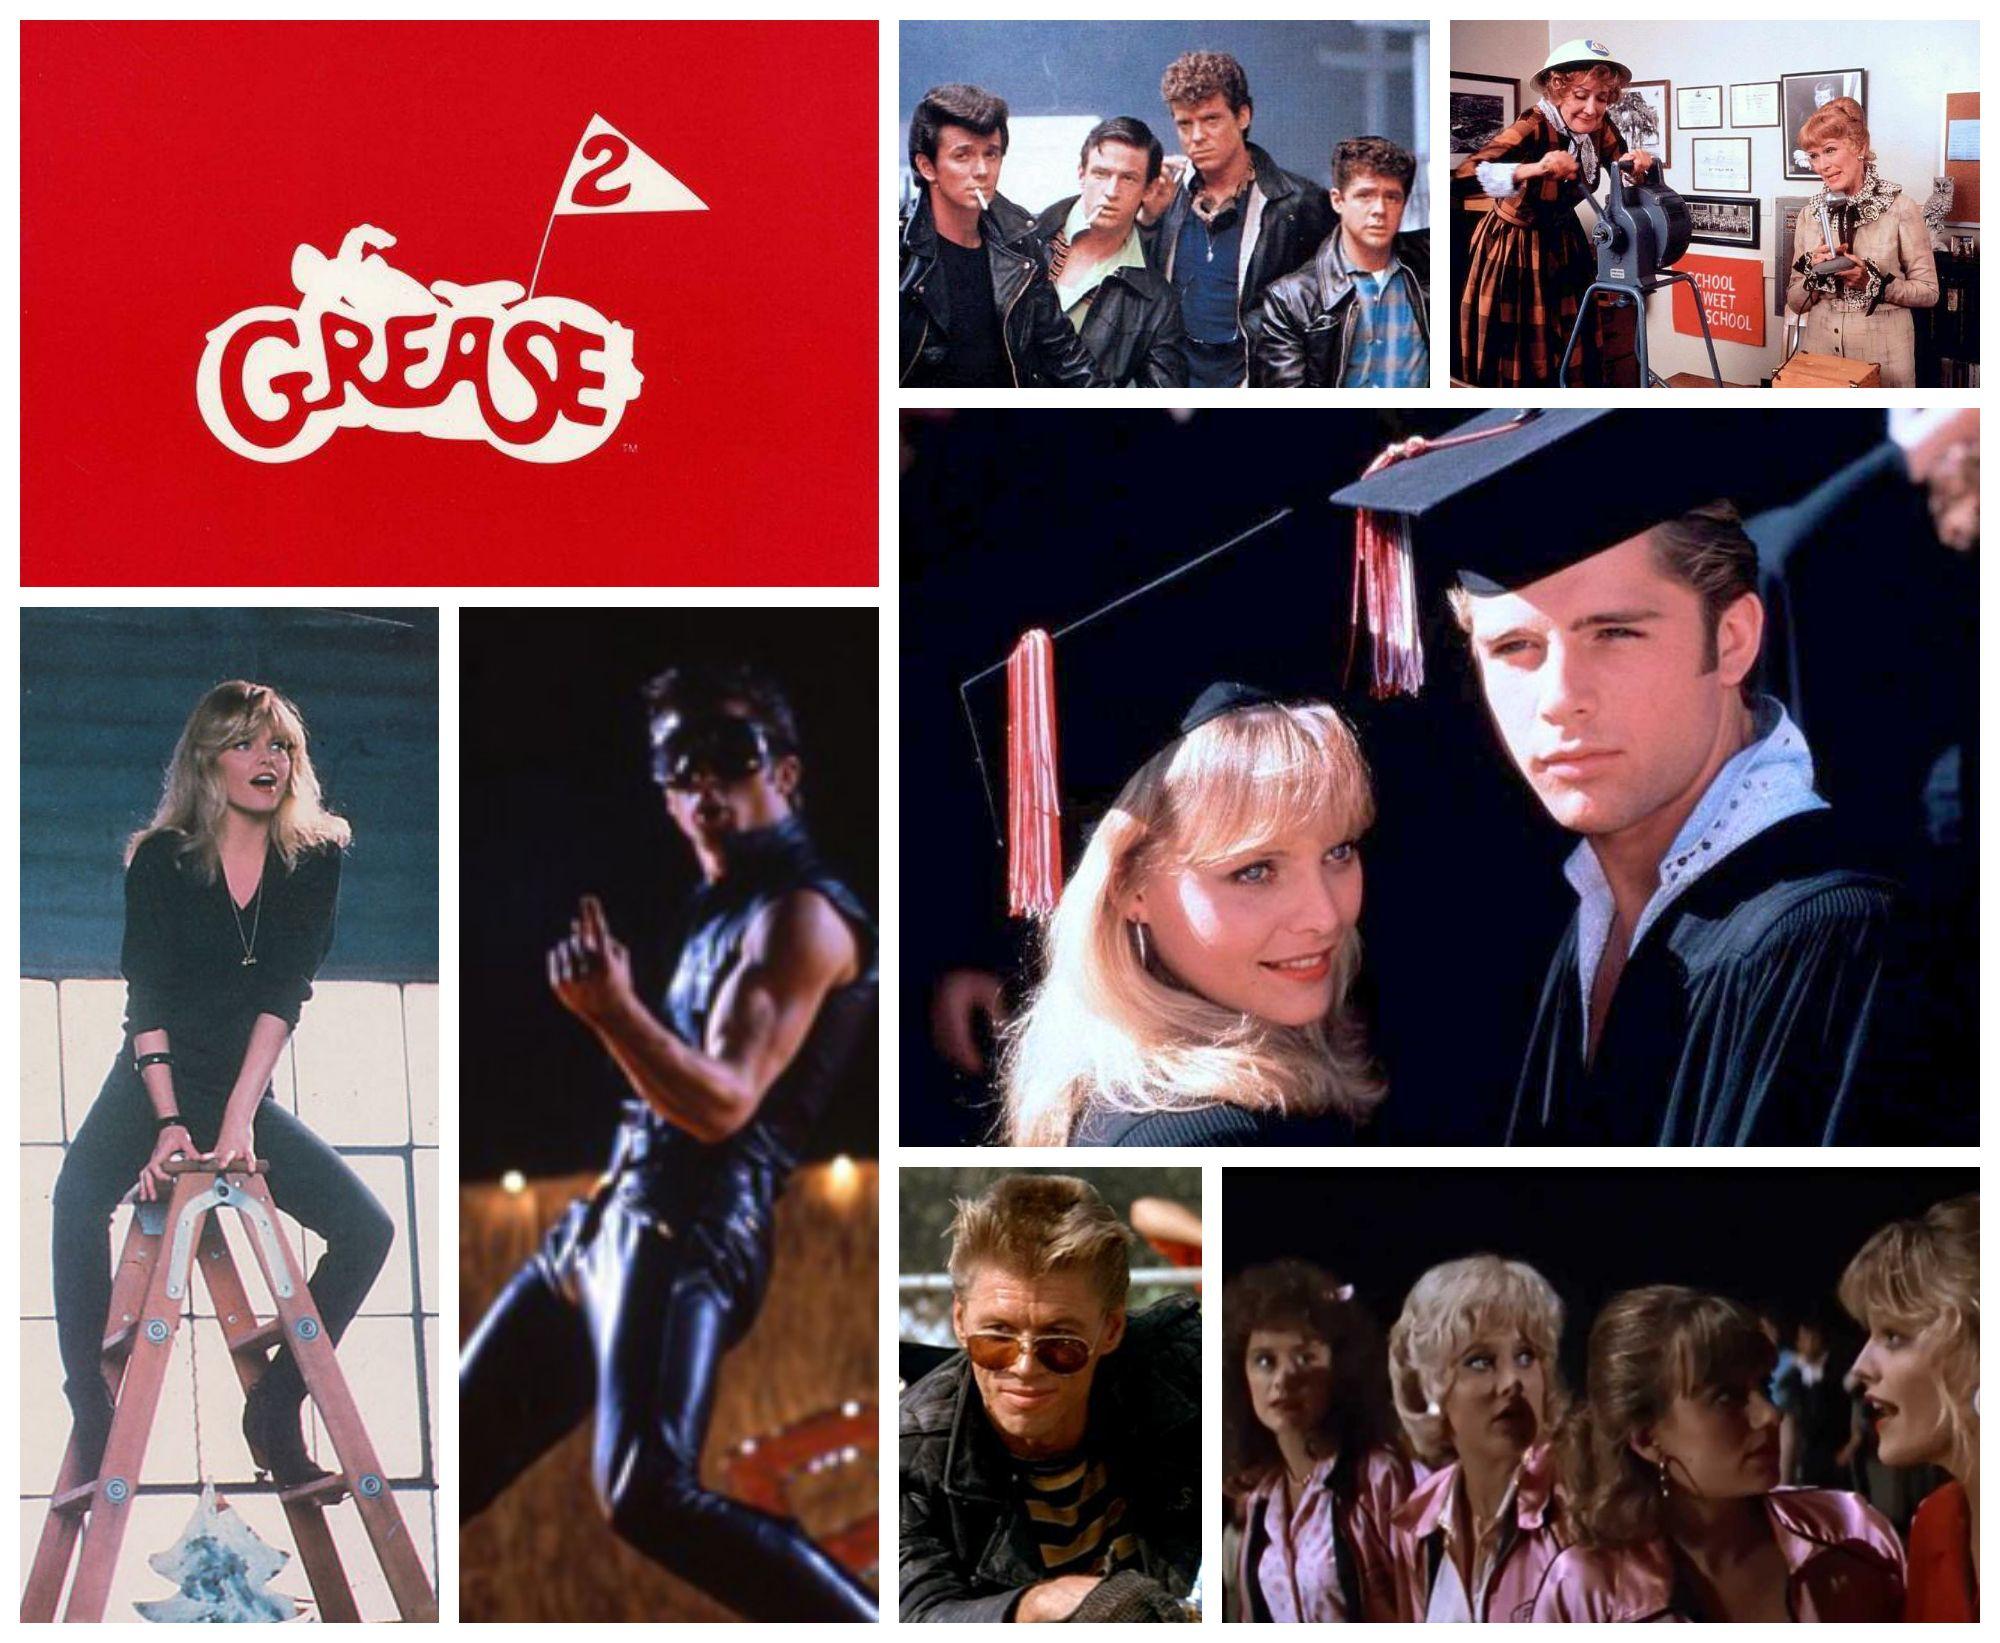 Happy 'Grease 2' Day 2014! Grease2.net